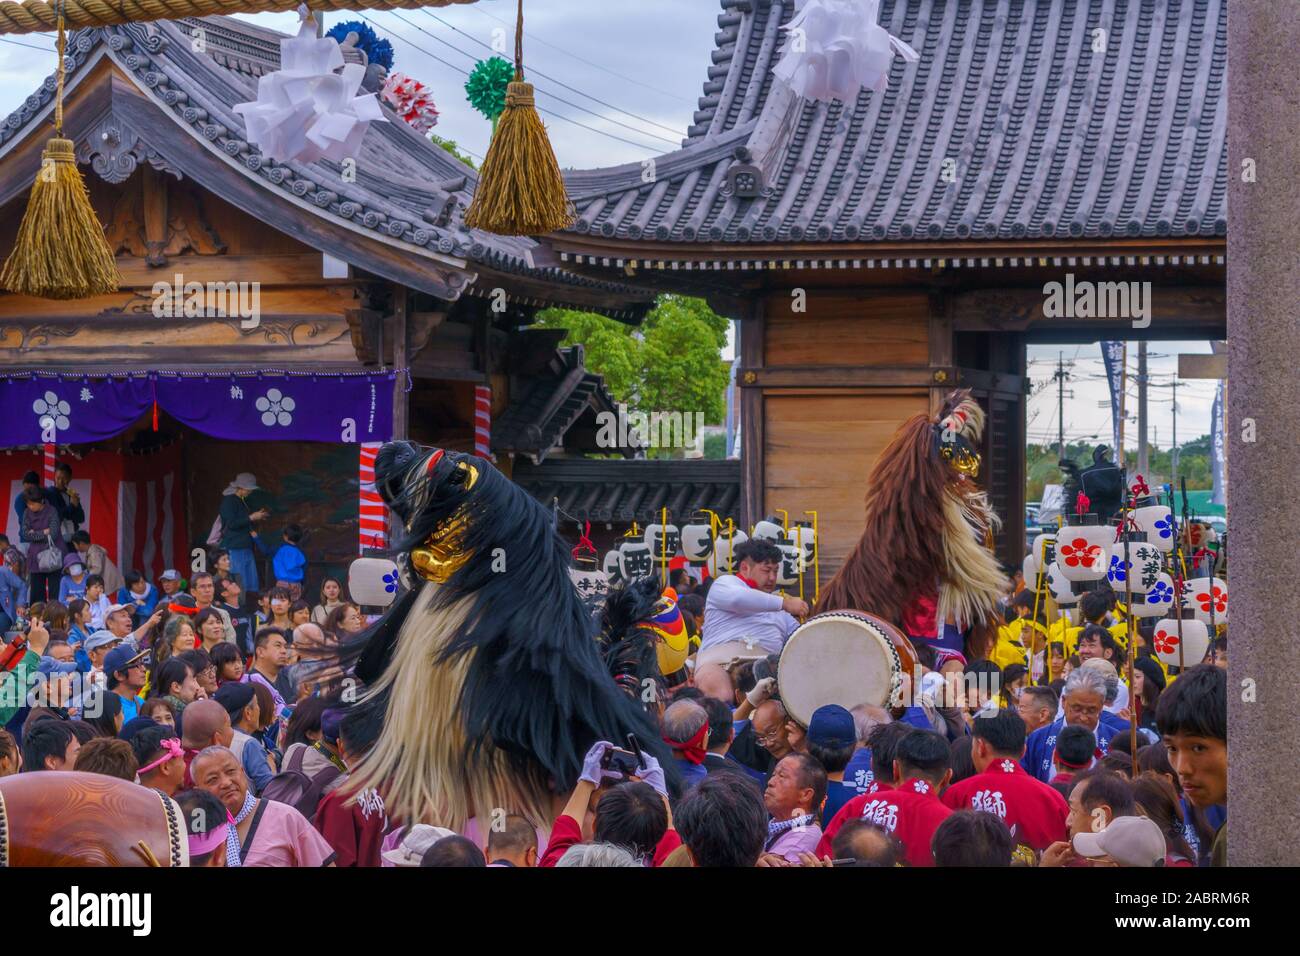 Himeji, Japan - October 15, 2019: Traditional dance of hair lion ceremony (shishimai), with men switch in lion costume. Part of the autumn festival of Stock Photo